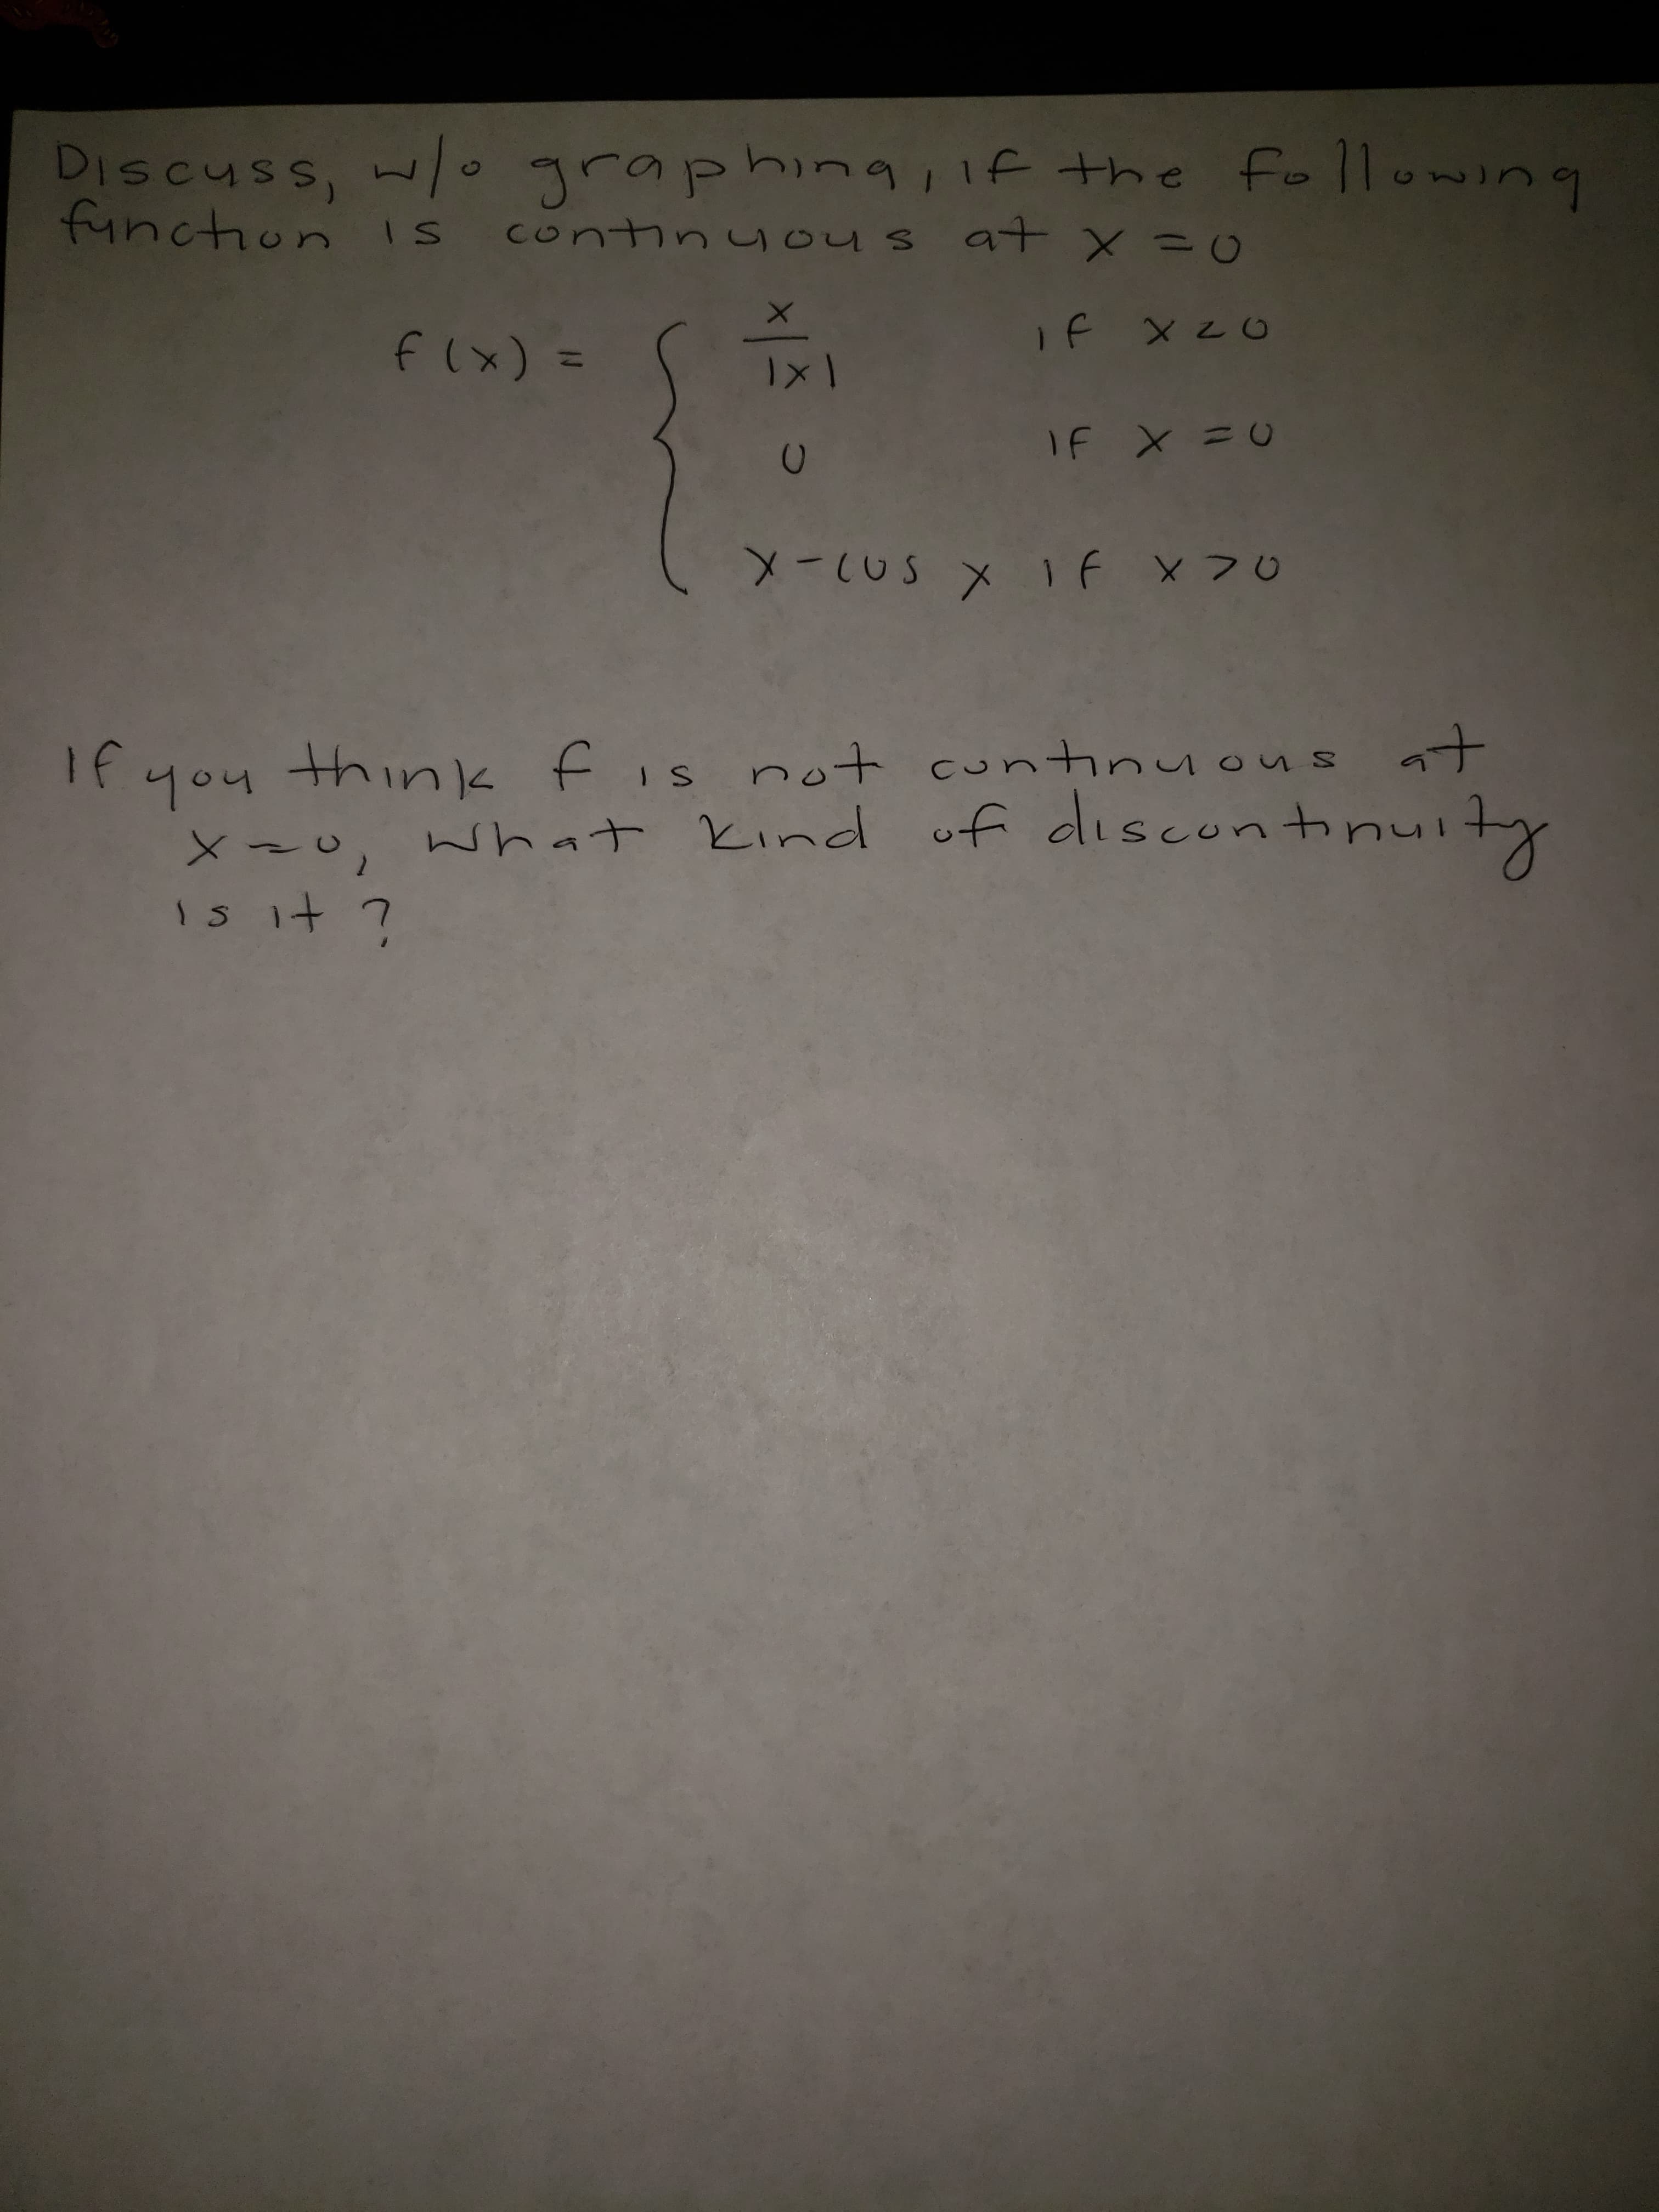 DIScuss, w/o
function IS
graphin9,1f the following
continu ous at x=0
f (x) =
%3D
1X1
-(US x If x70
-CUS
If you think fis not cuntinuous at
what Kind of dise
continuity
xzo,
